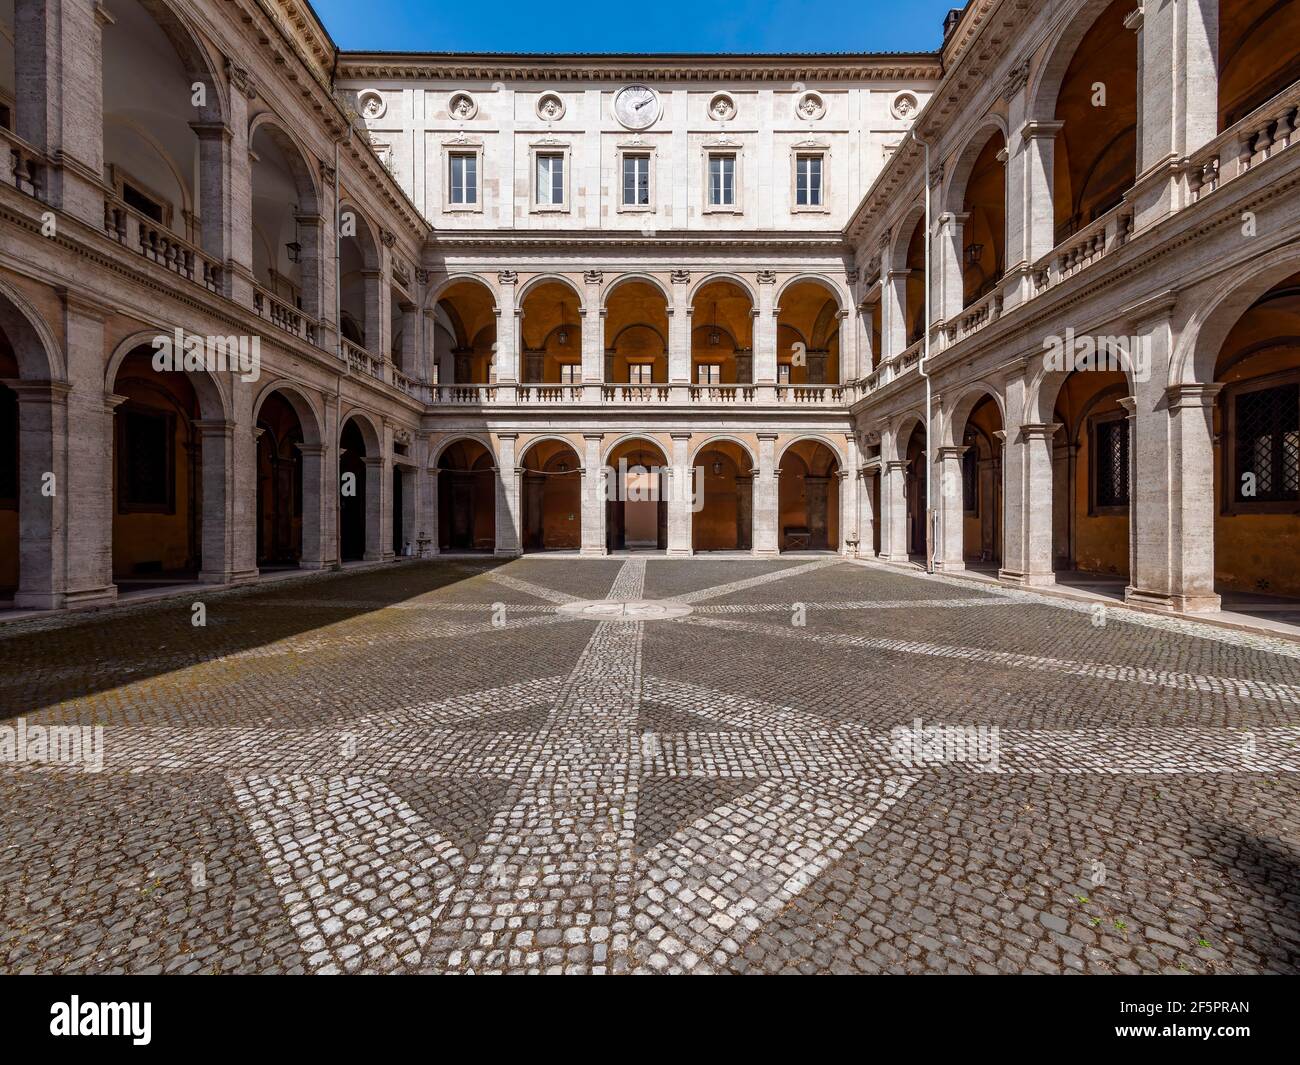 Renaissance Courtyard. The Chiostro del Bramante, one of the high points of Renaissance architecture in Rome, was designed by Donato Bramante. Stock Photo